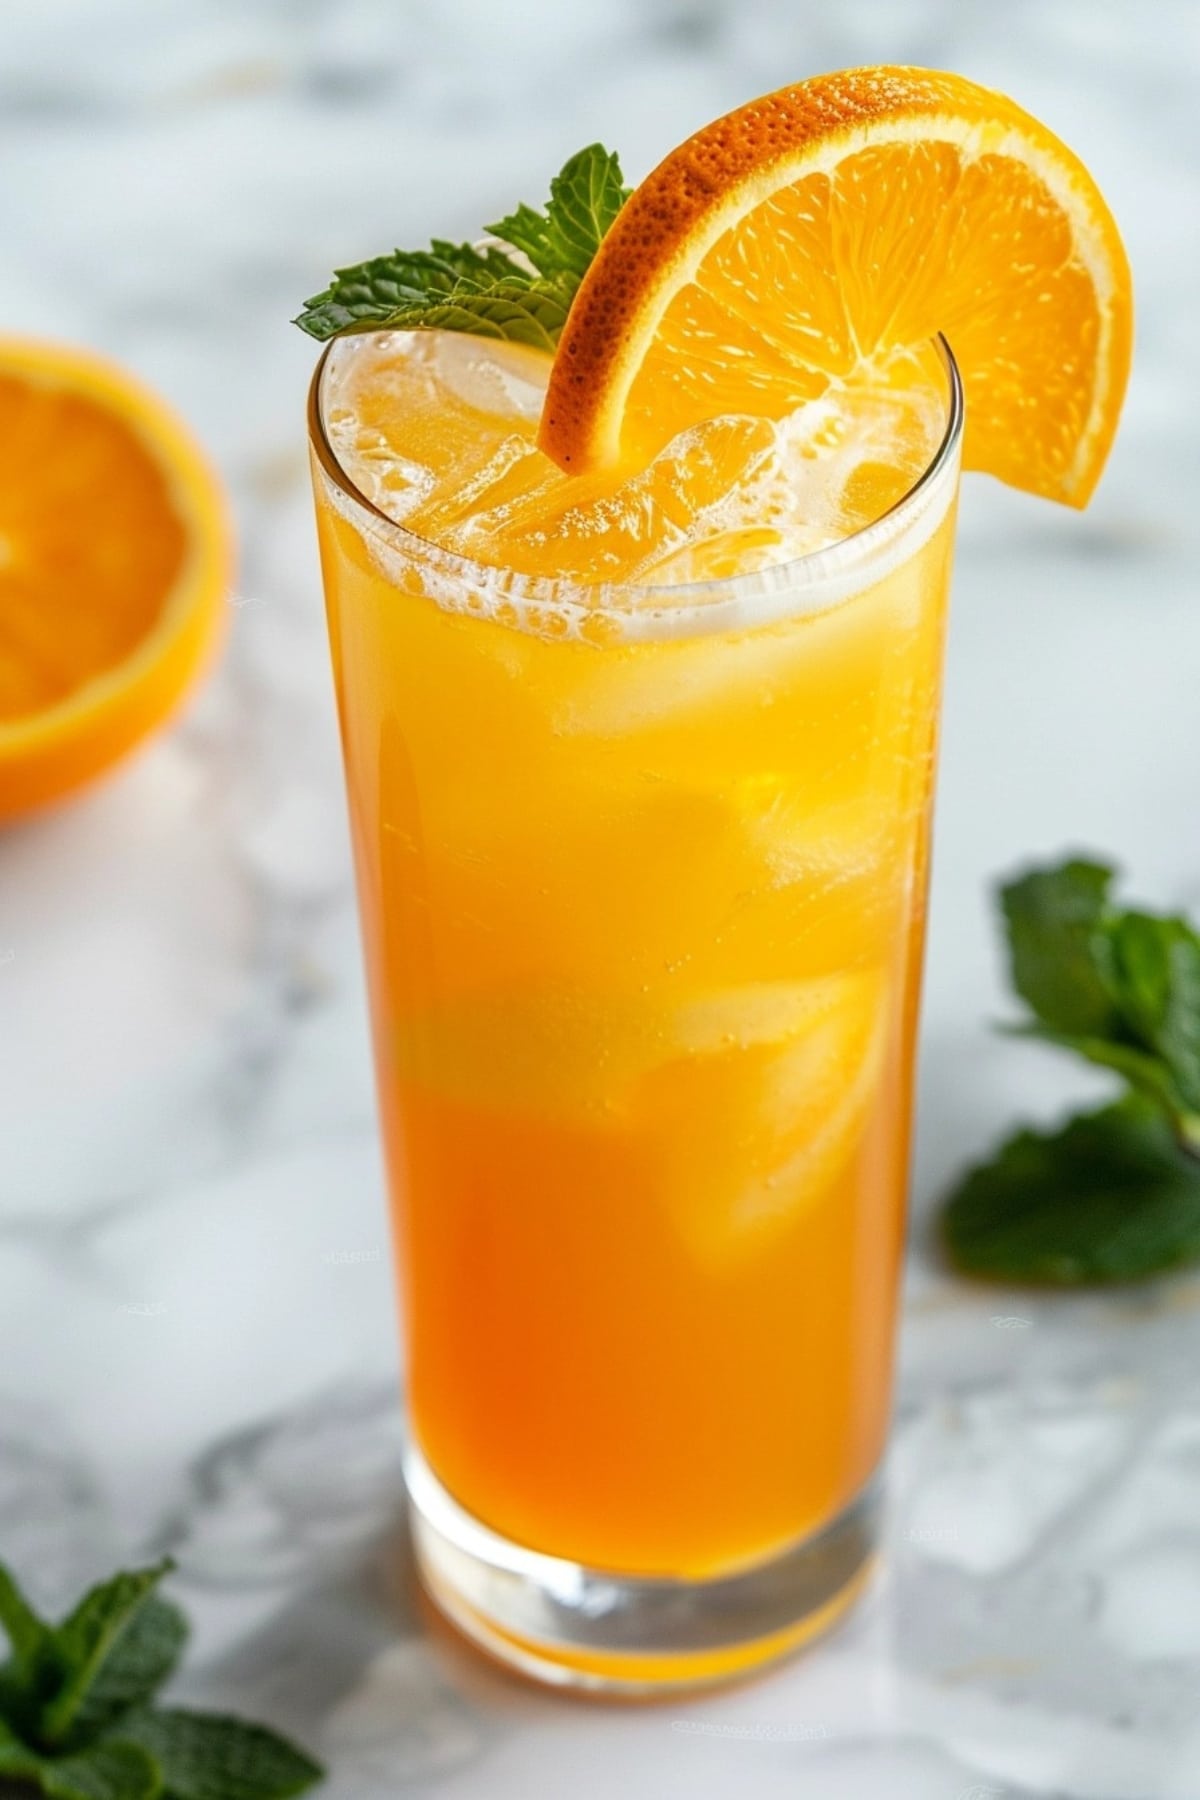 Filled with iced, orange crush cocktail in a high ball glass garnished with mint and orange slice.